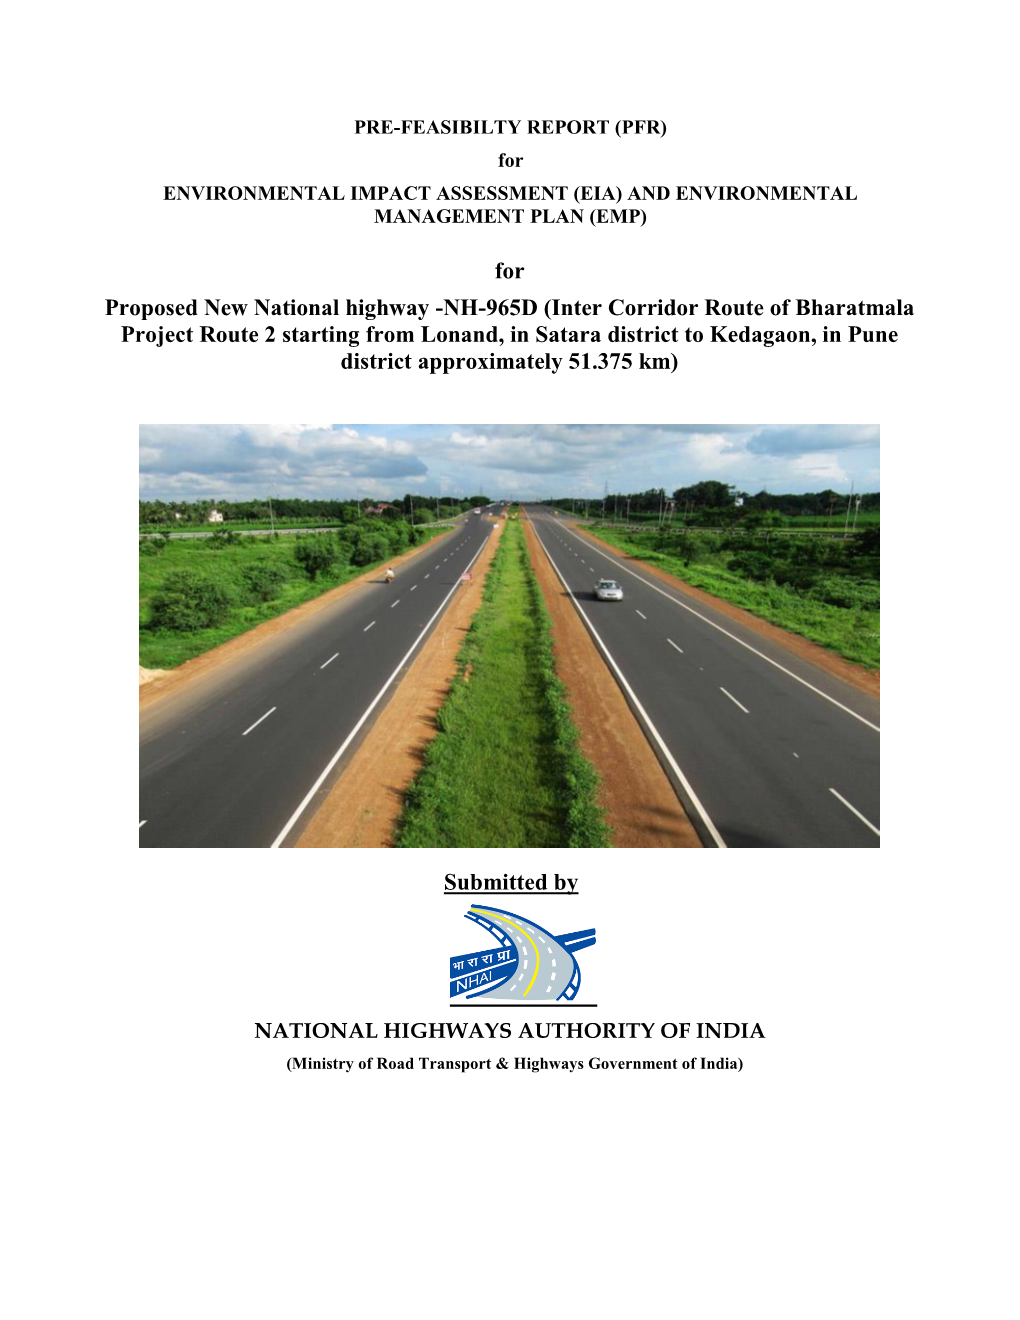 NH-965D (Inter Corridor Route of Bharatmala Project Route 2 Starting from Lonand, in Satara District to Kedagaon, in Pune District Approximately 51.375 Km)